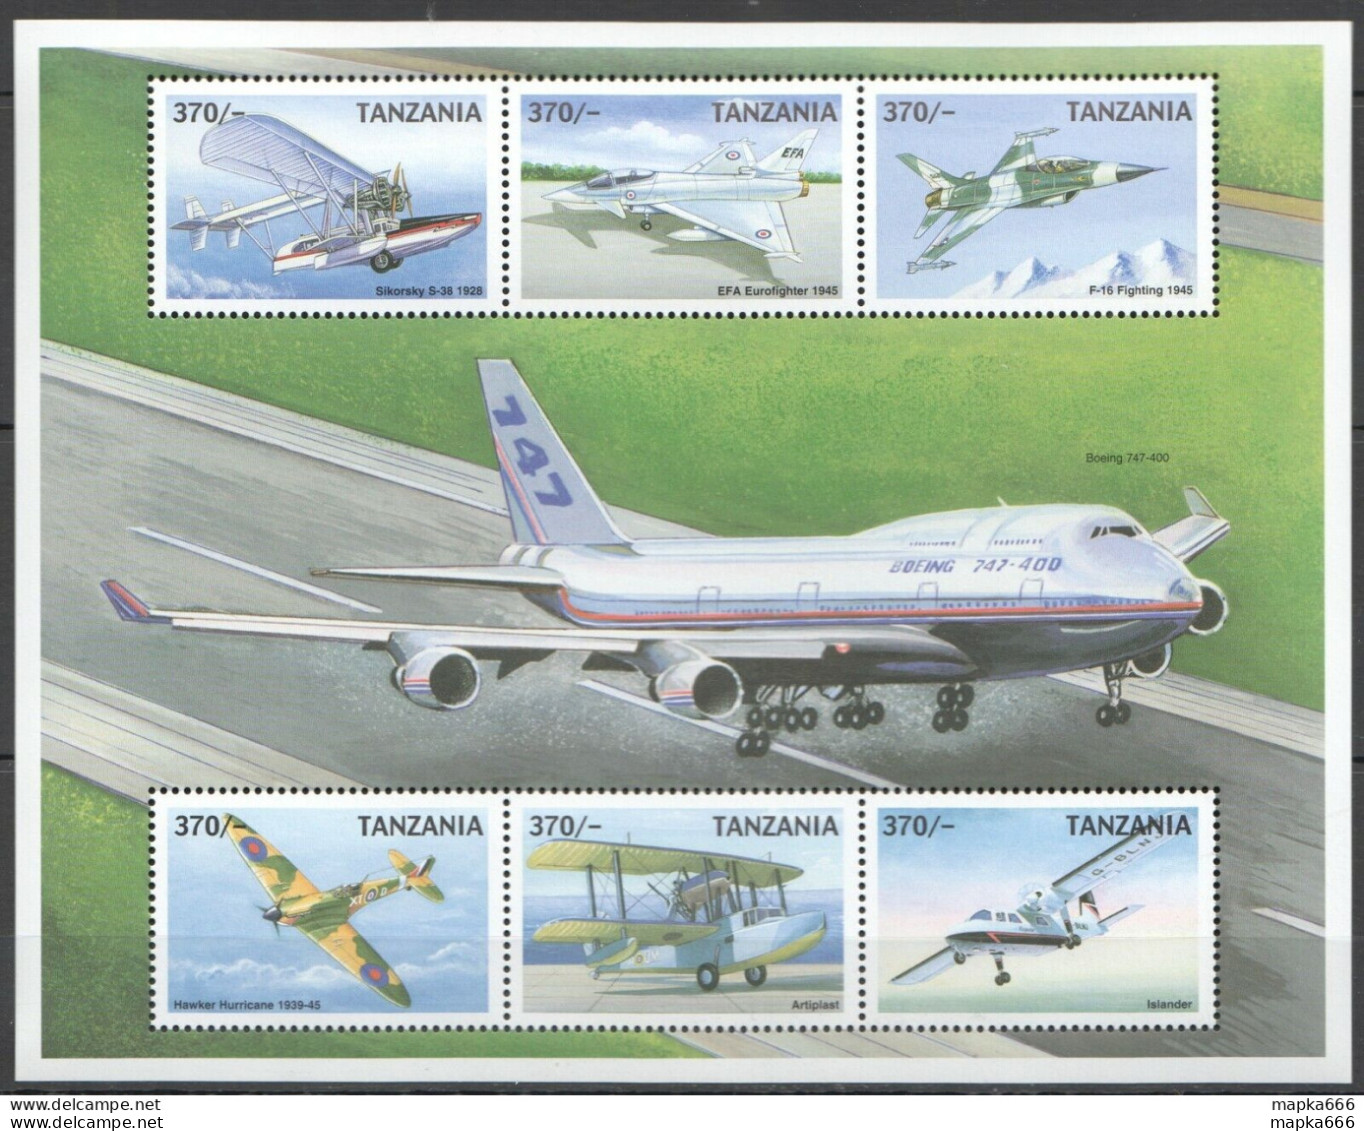 Pk377 Tanzania Transport Aviations Planes Kb Mnh Stamps - Airplanes